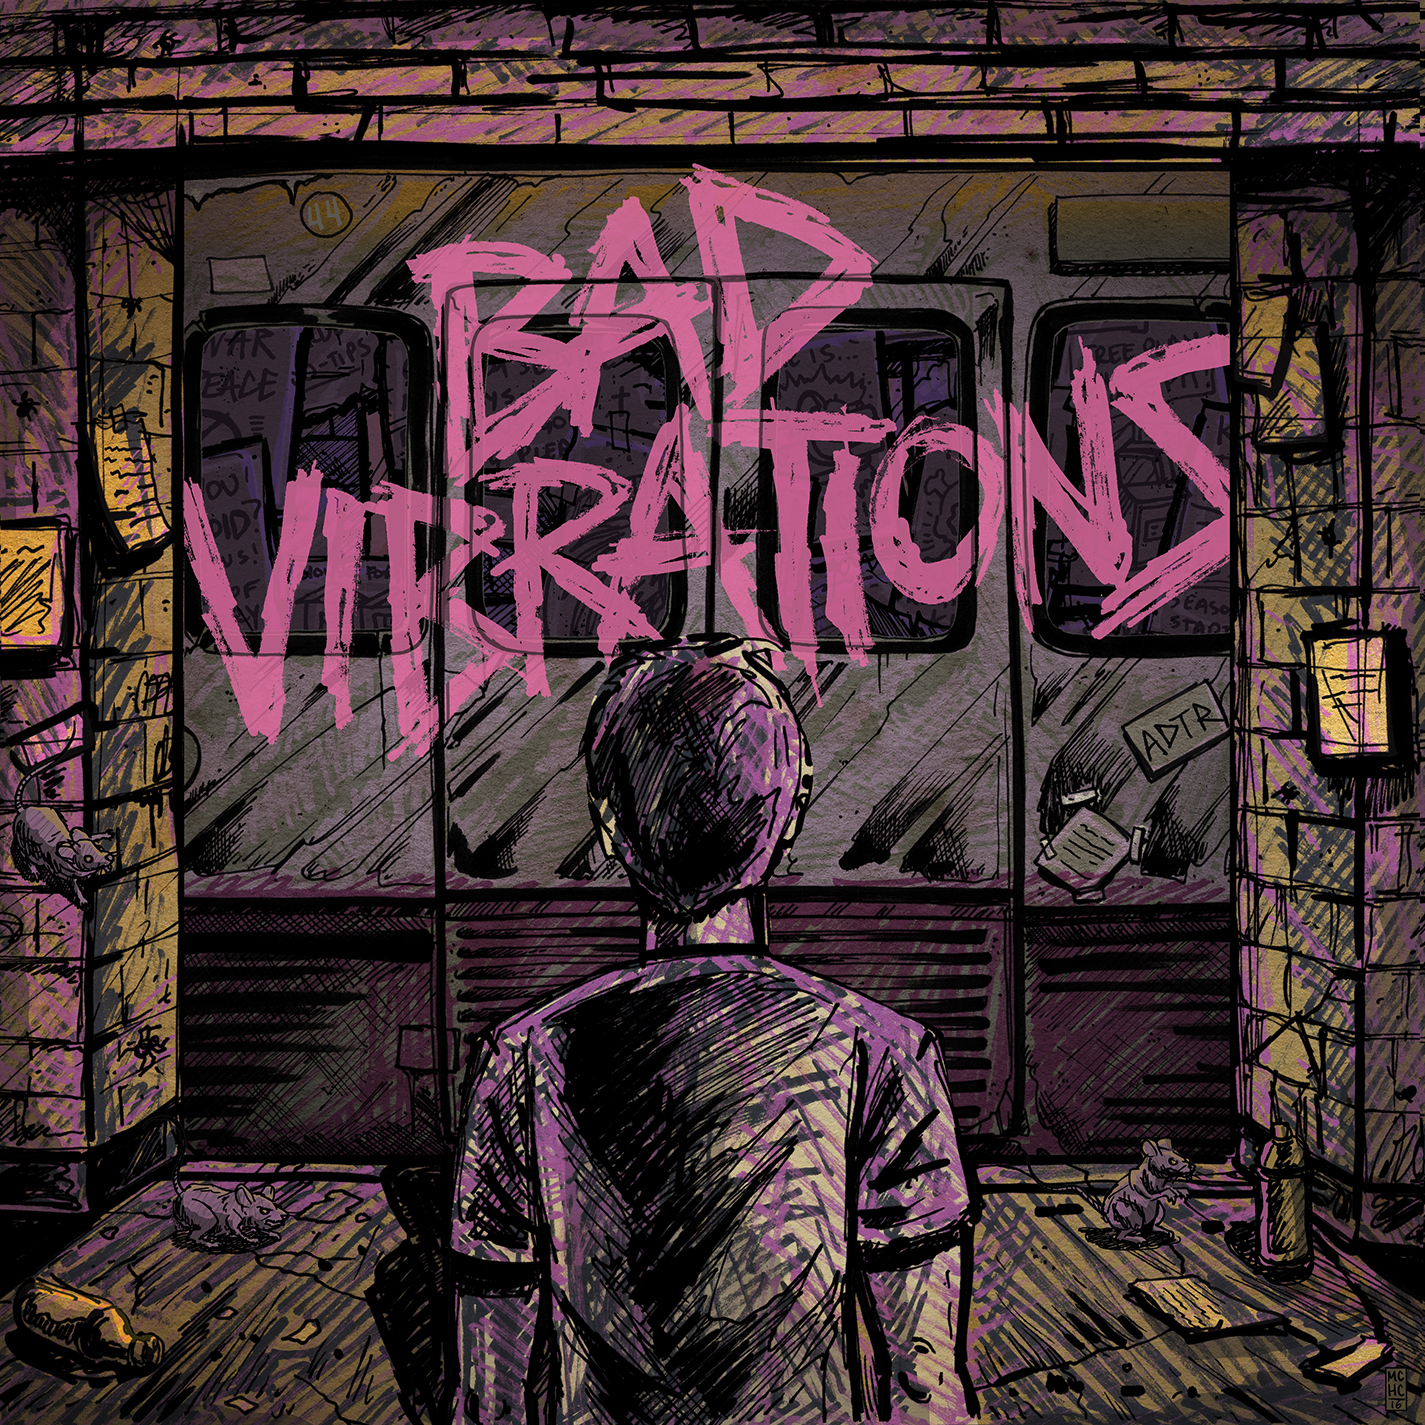 a-day-to-remember-bad-vibrations-album-art-2016-supplied